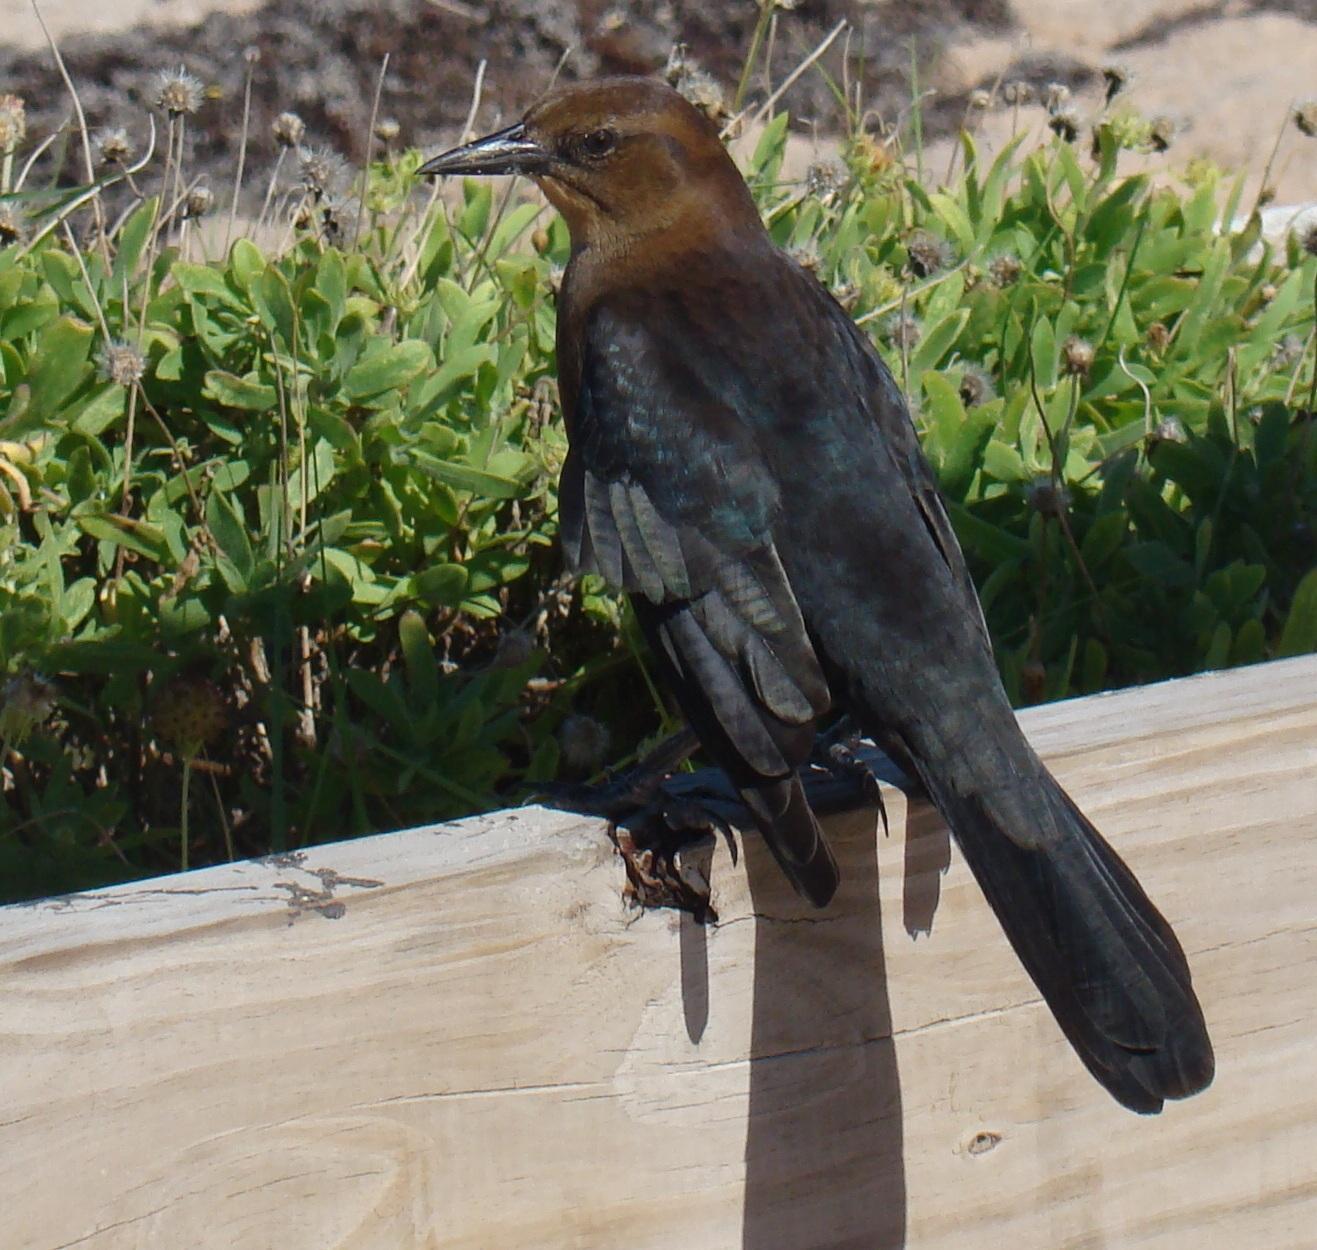 Boat-tailed Grackle Photo by Bob Heitzman